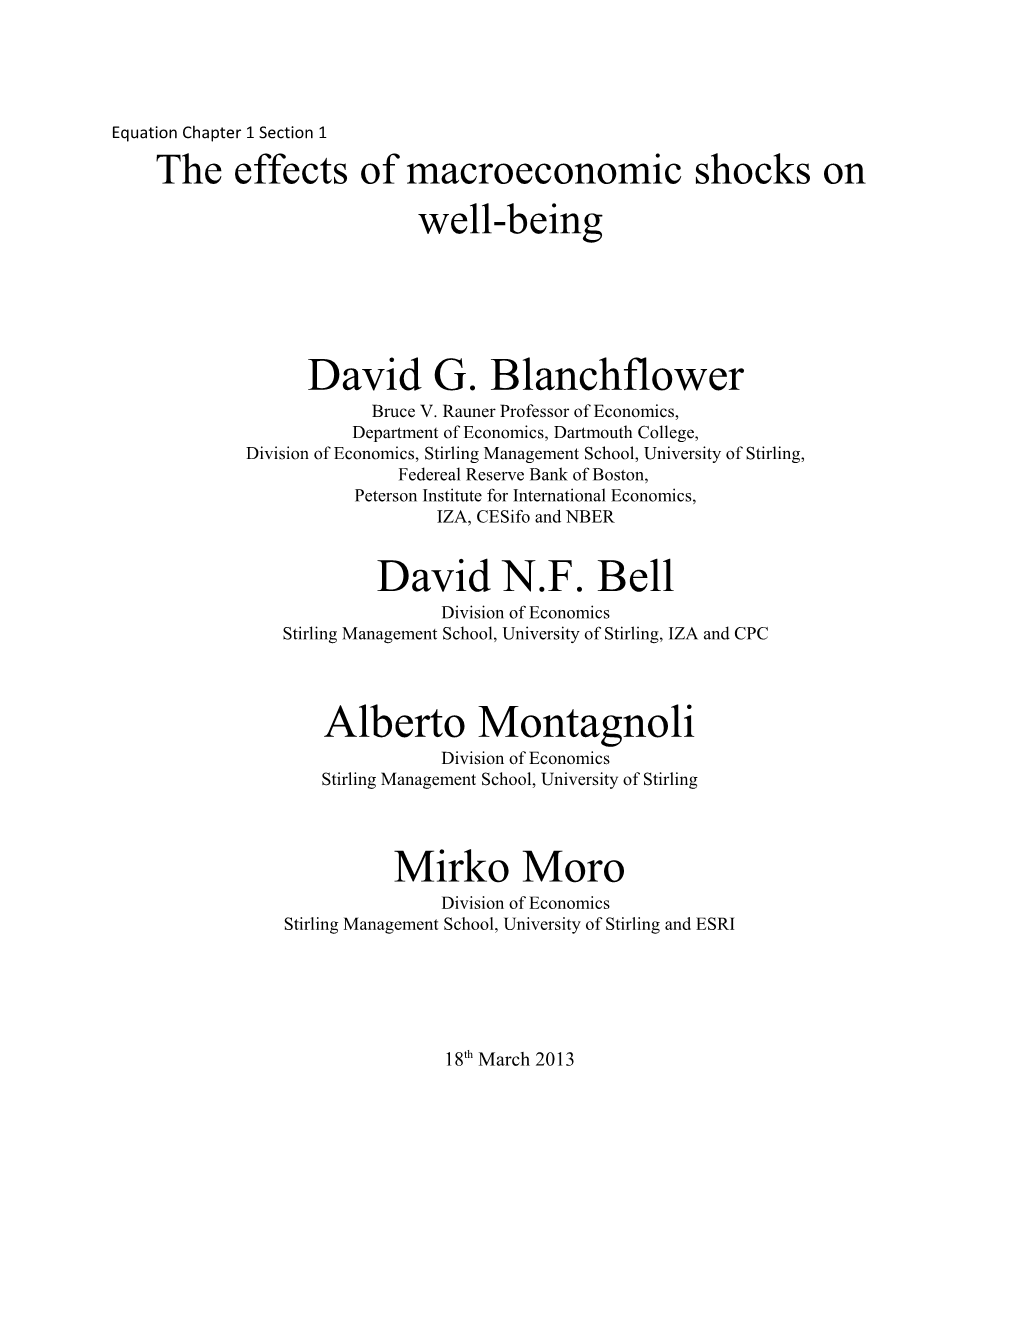 The Effects of Macroeconomic Shocks on Well-Being